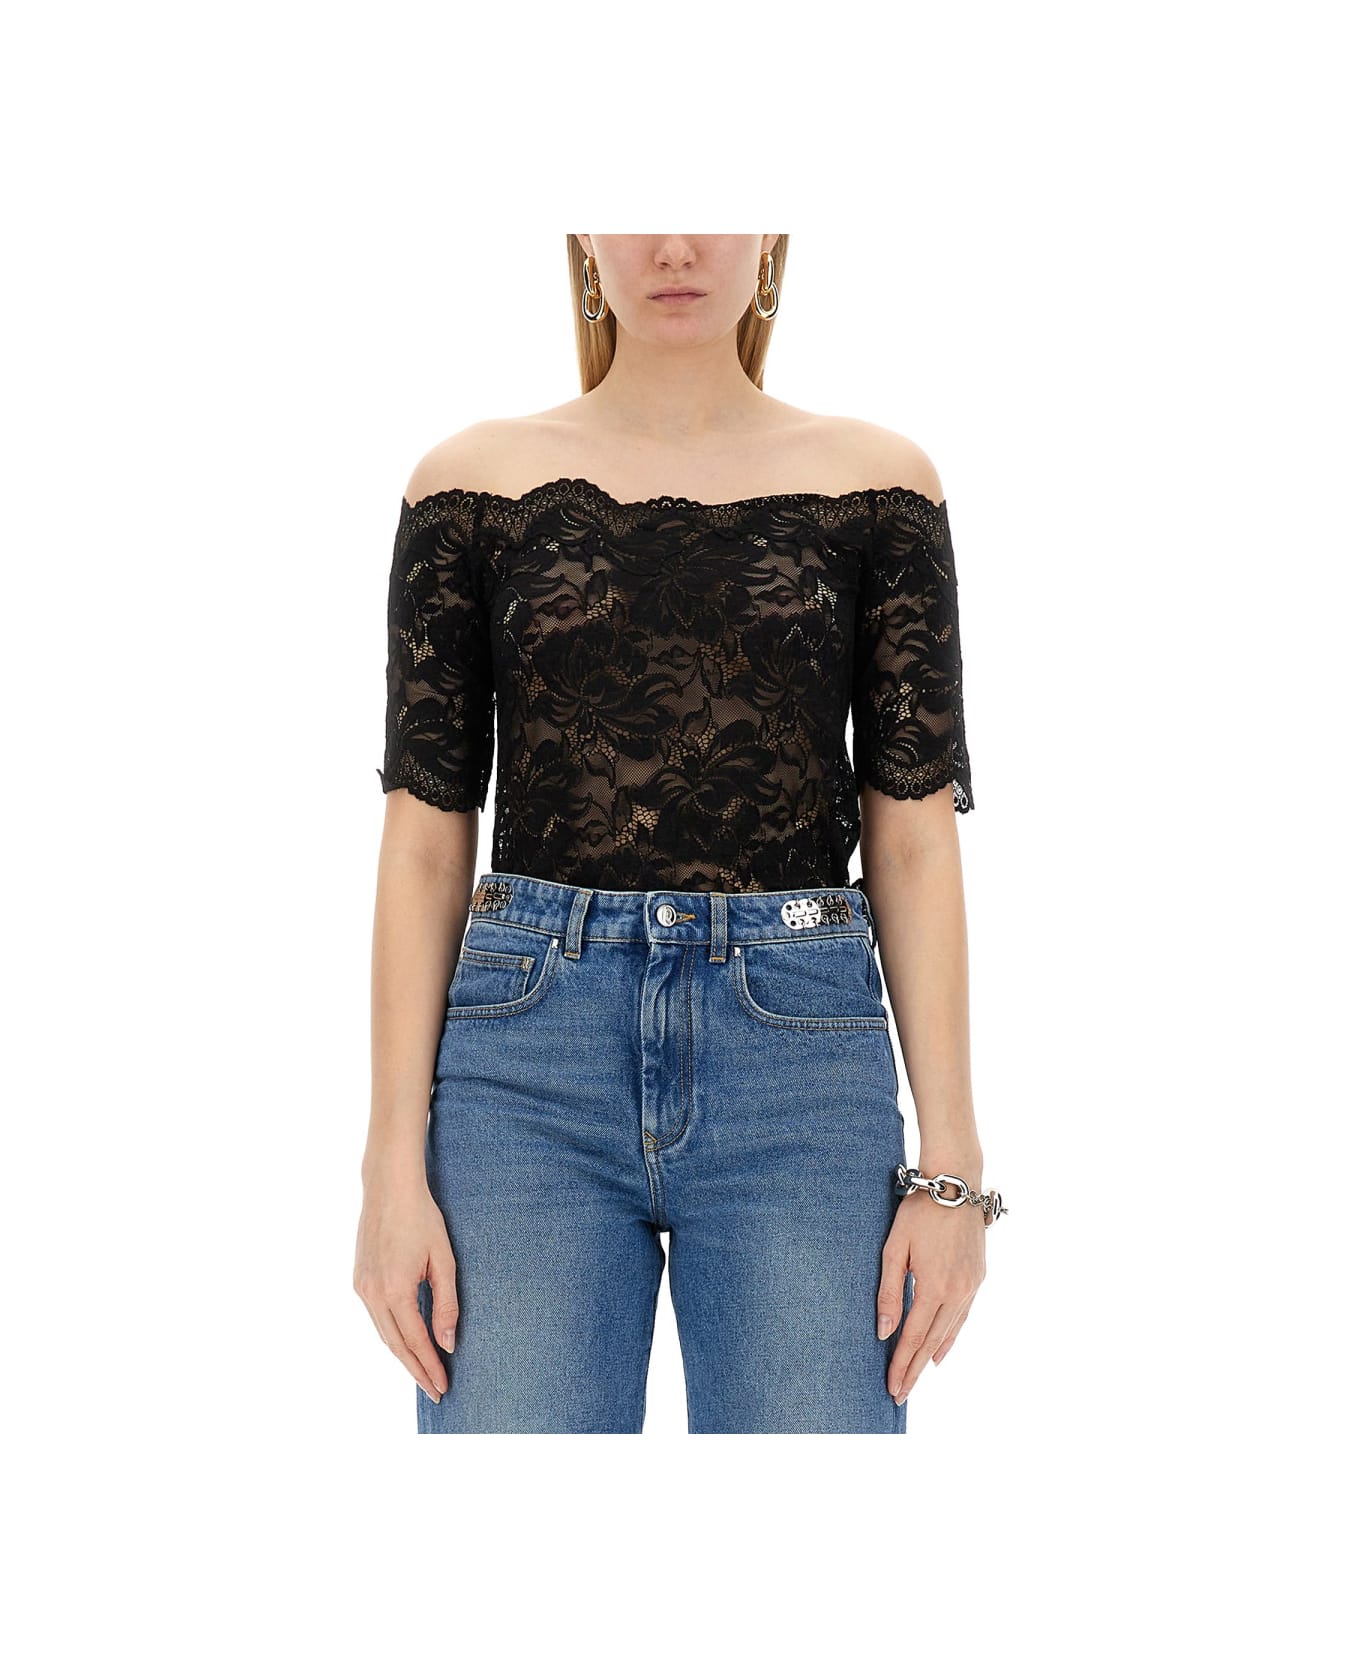 Paco Rabanne Lace Top - BLACK トップス